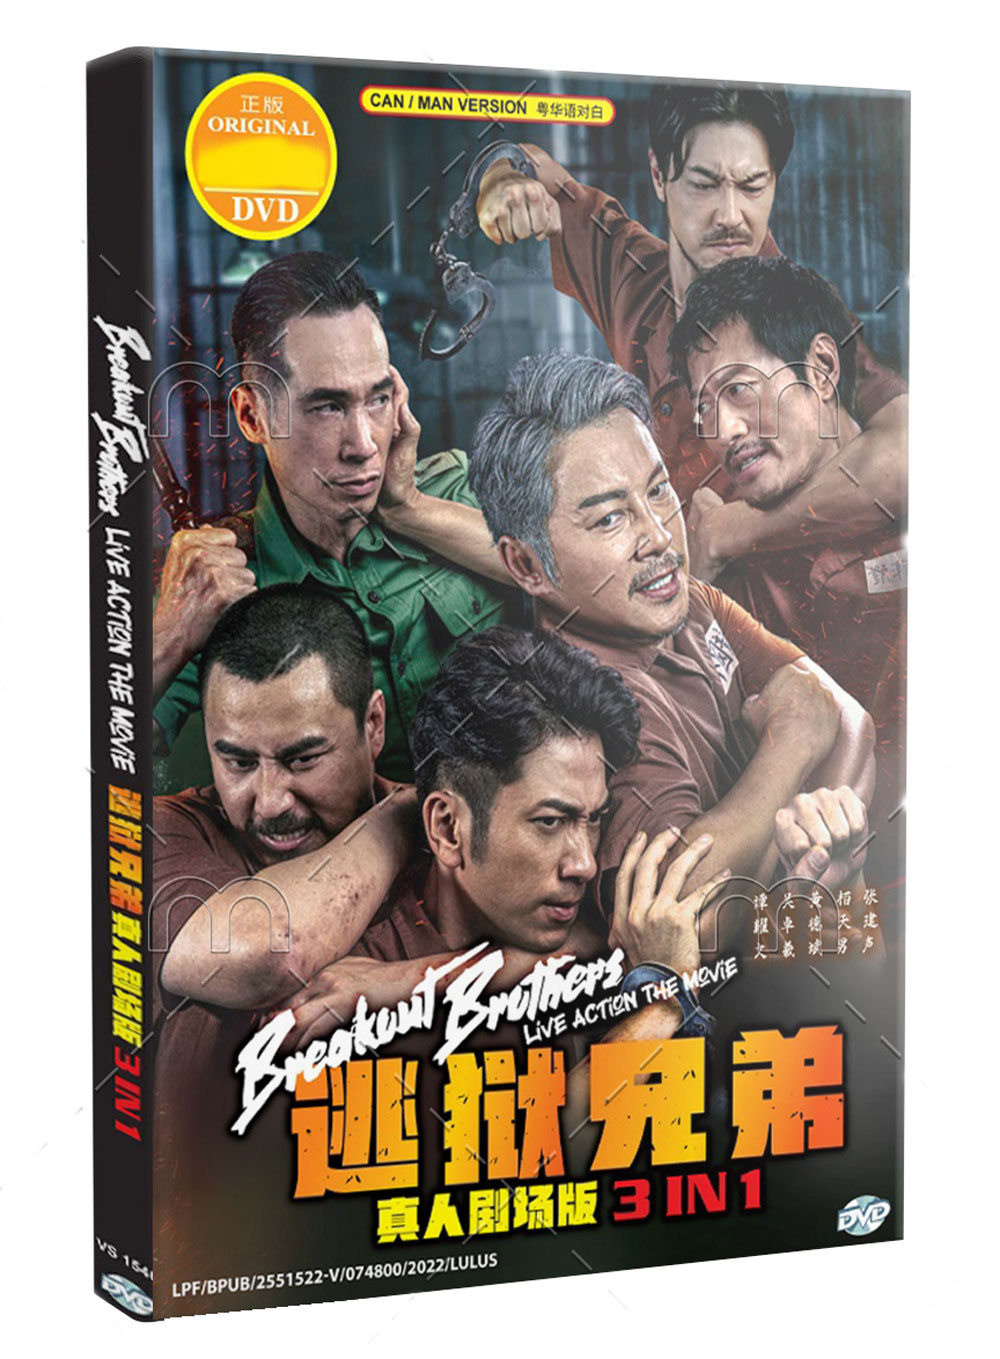 Breakout Brothers 3 In 1 (DVD) (2020) 香港映画